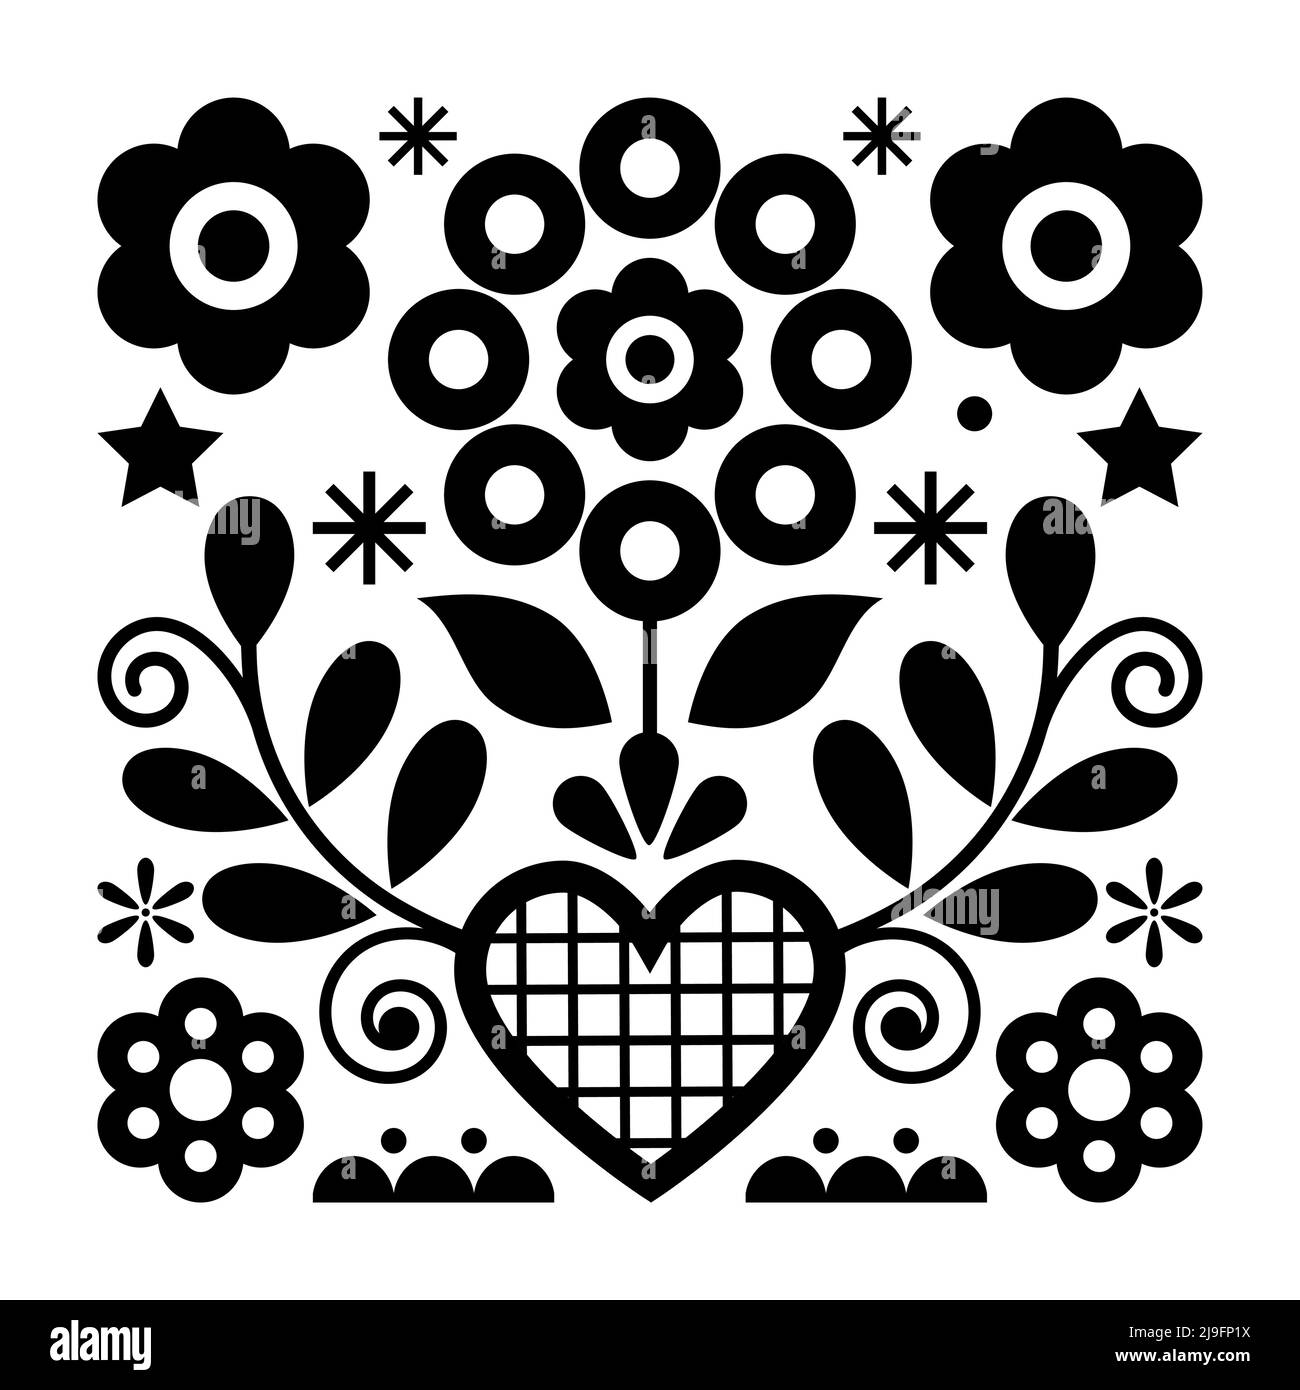 Folk art vector design with flowers and heart from Nowy Sacz in Poland inspired by traditional highlanders embroidery Lachy Sadeckie in black and whit Stock Vector